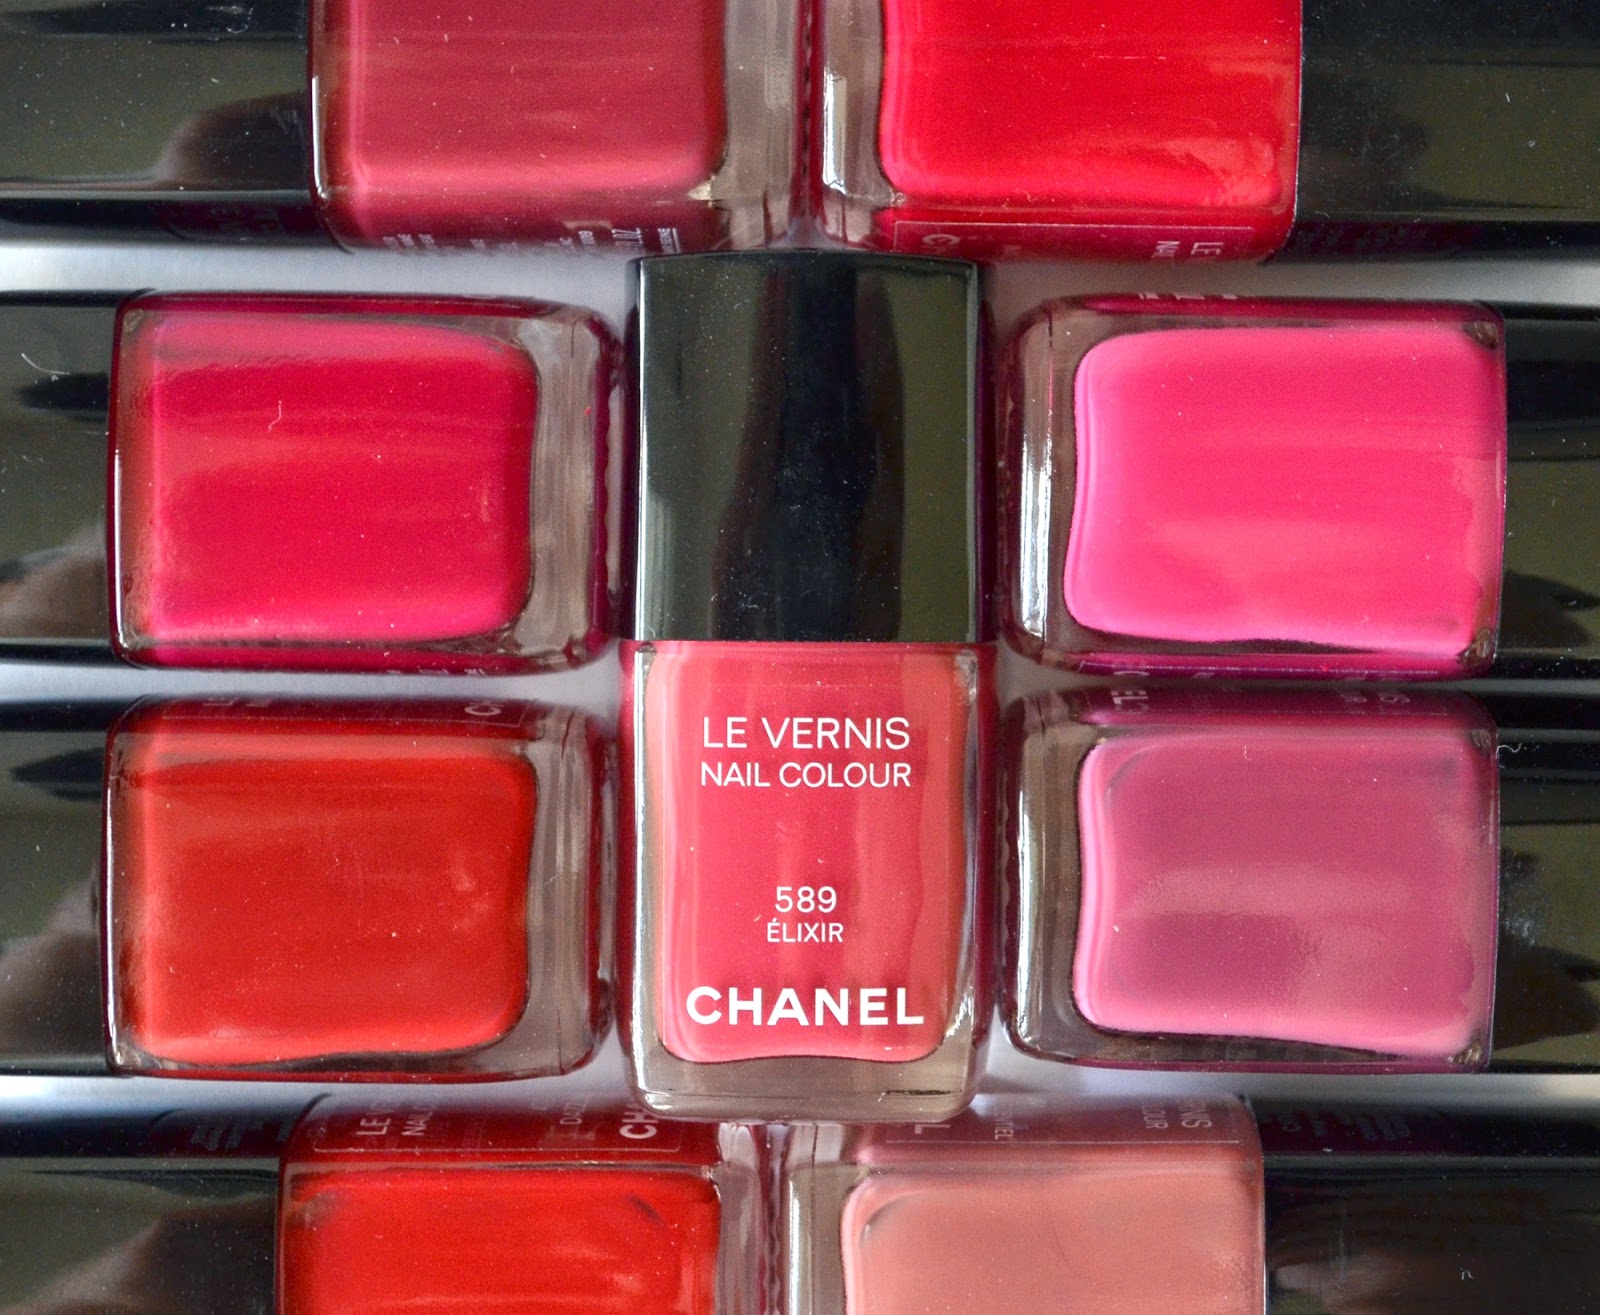 Chanel Le Vernis #589 Elixir from Superstition Fall 2013 Collection